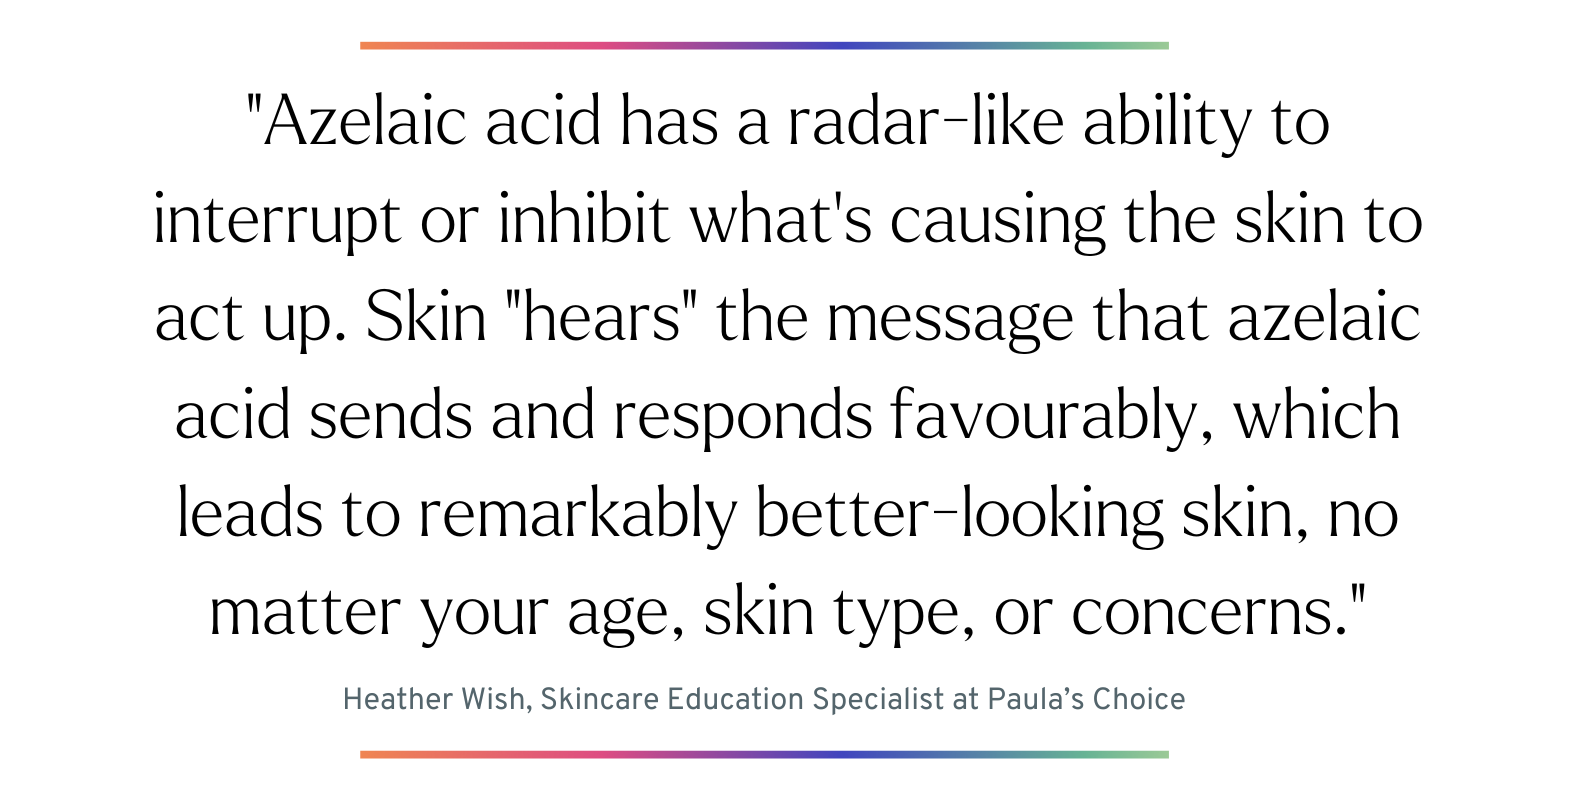 Quote from Heather Wish, Skincare Education Specialist at Paula’s Choice